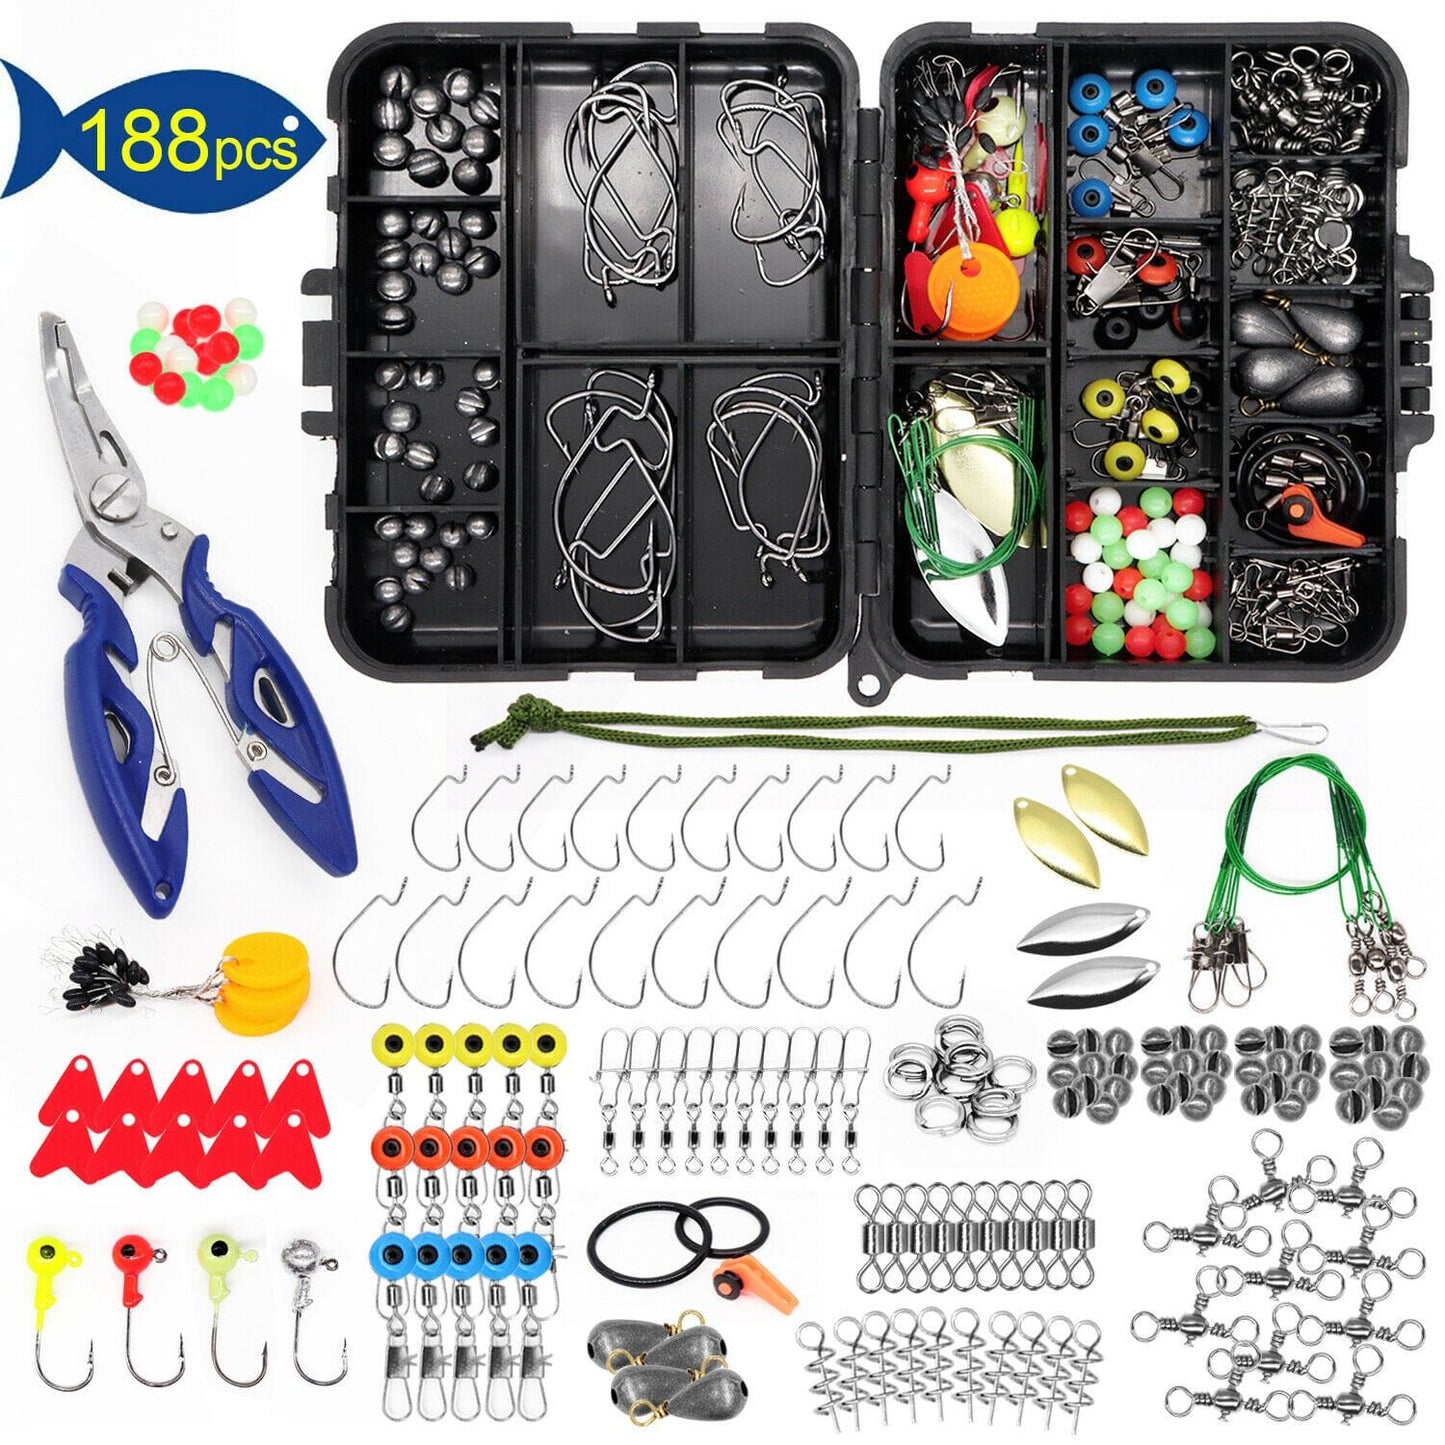 Otterk 188PC Fishing Accessories Kit set with Tackle Box